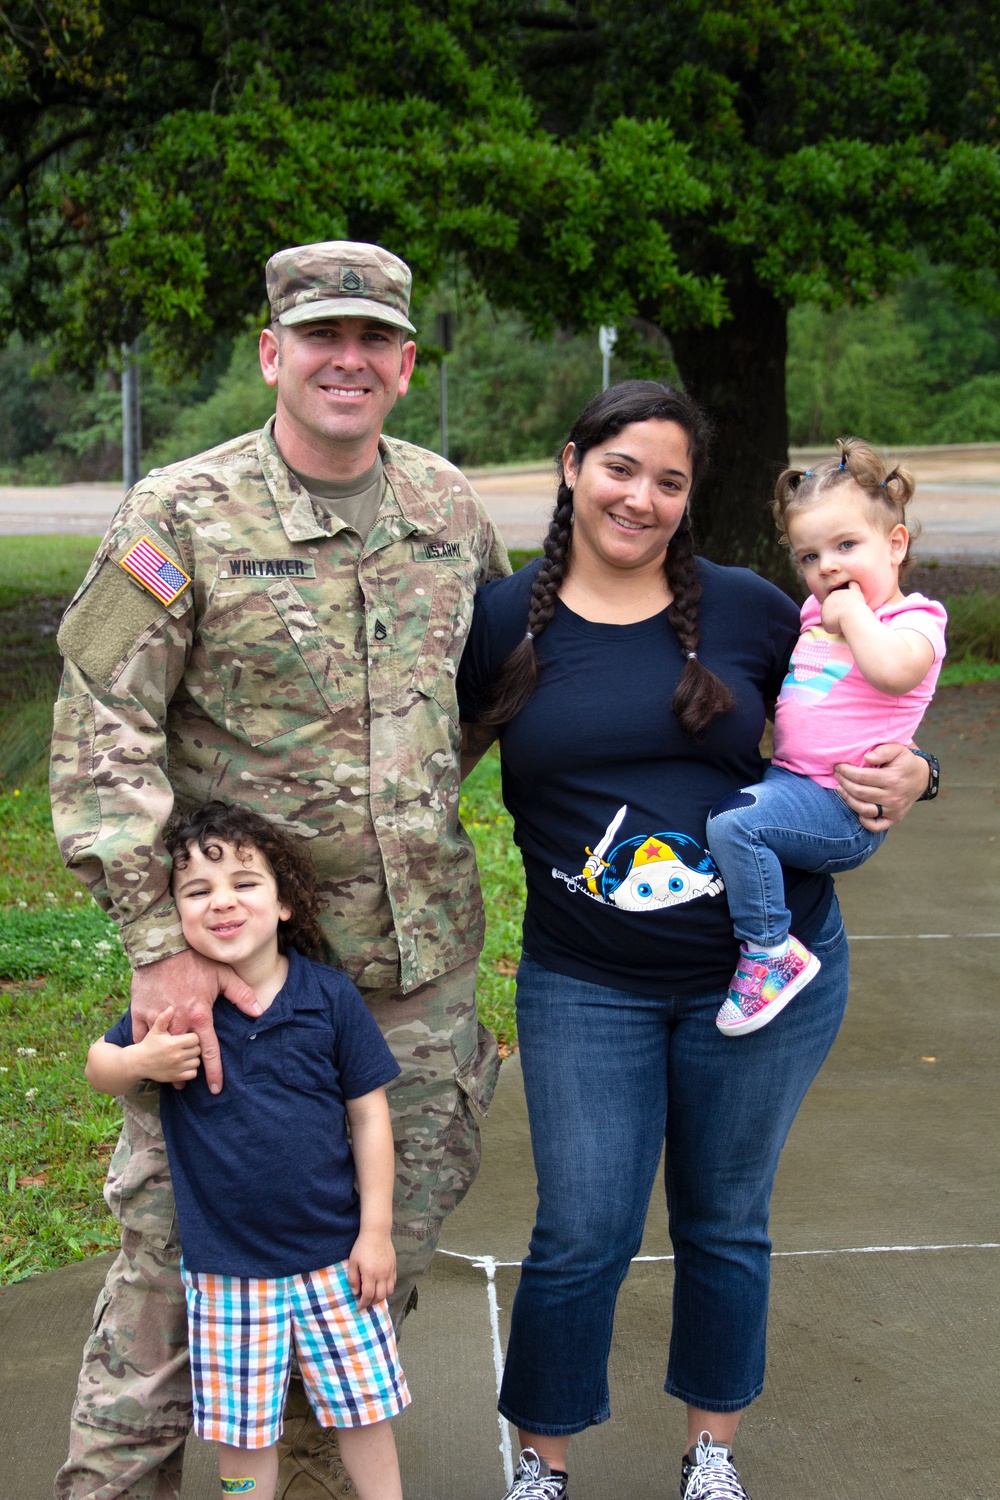 Dual military family finds relief through Army services